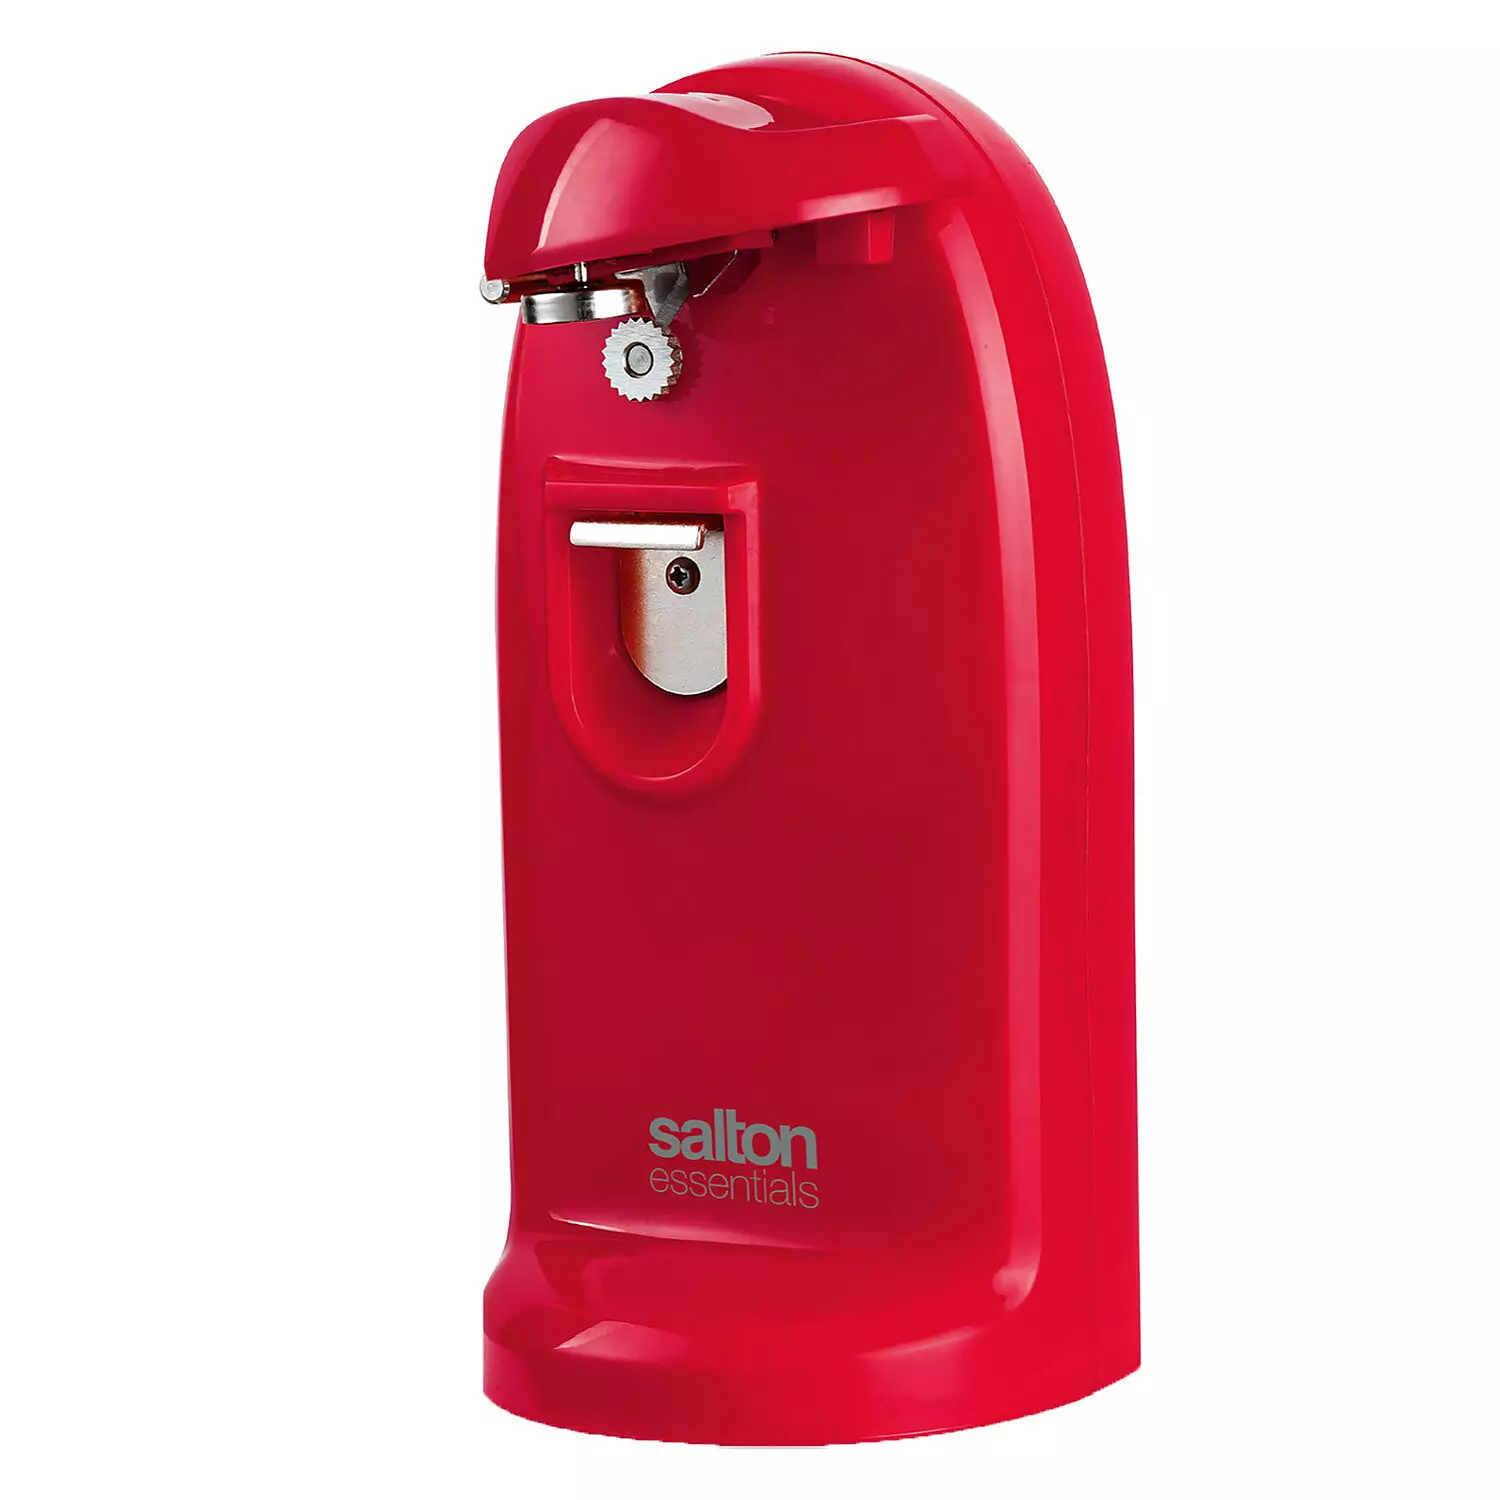 Salton Essentials - Electric can opener, red